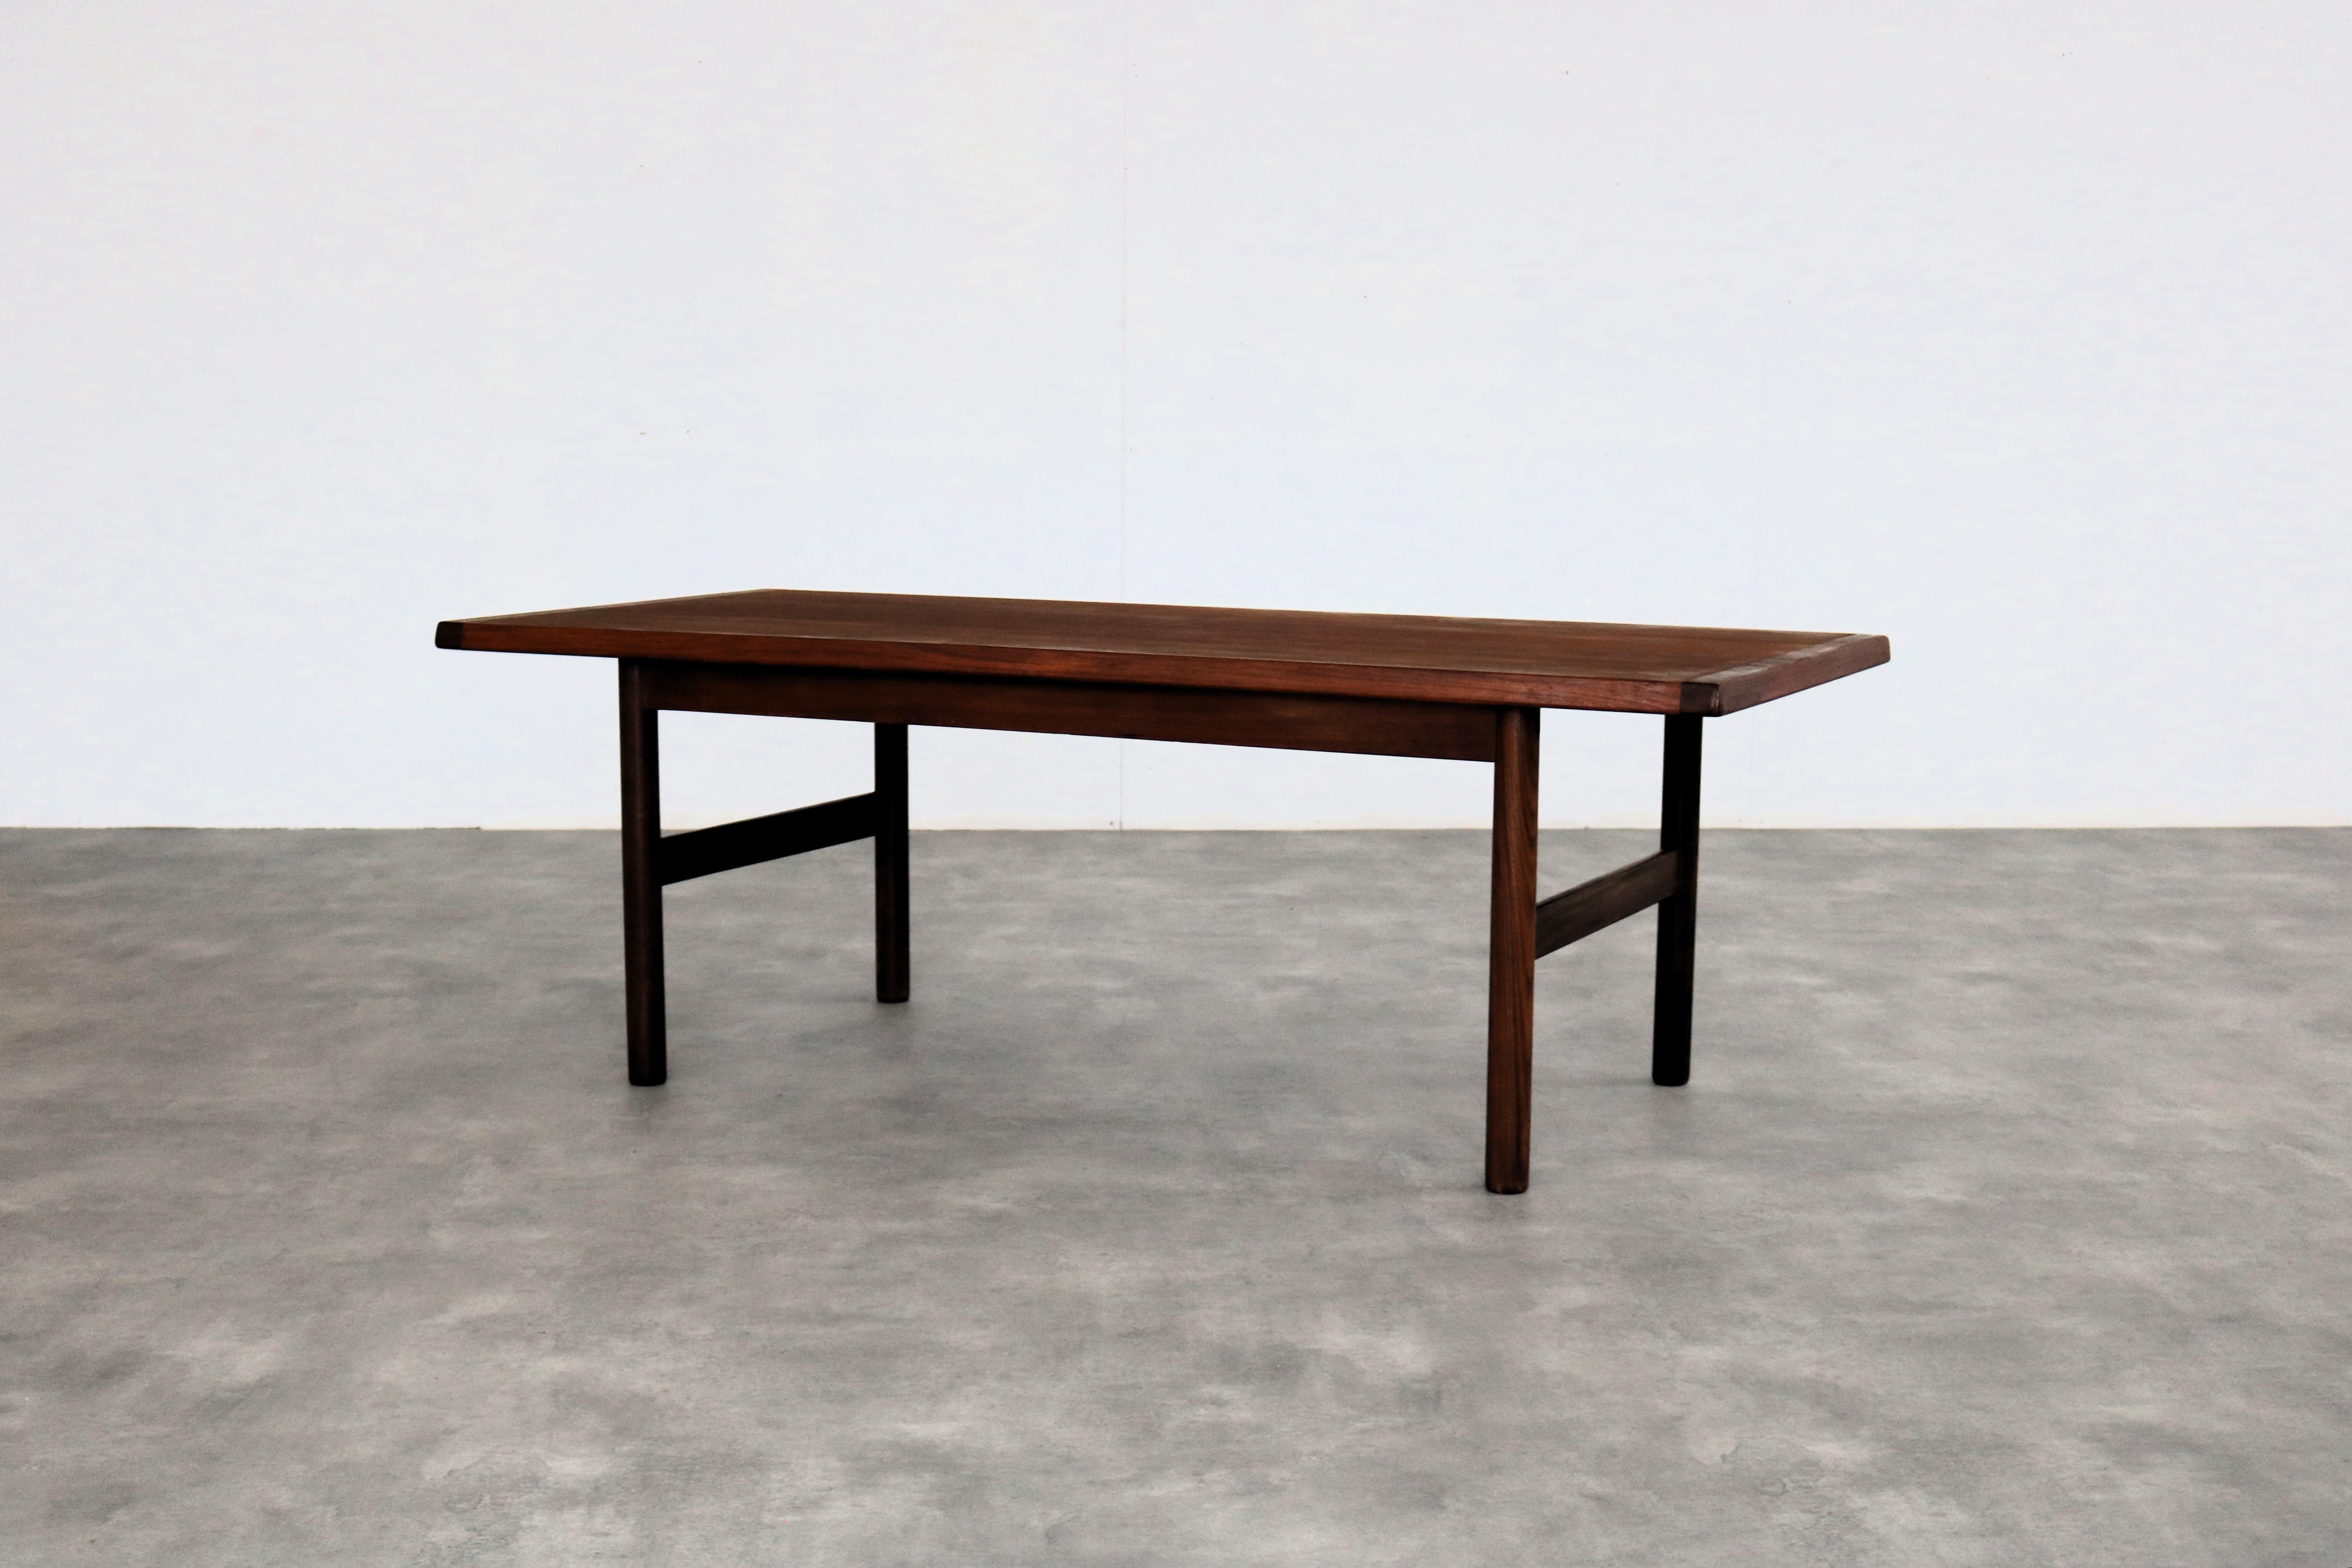 vintage coffee table | table | teak | 60s | Swedish

period | 60's
design | unknown | Sweden
condition | good | light signs of use
size | 56 x 157 x 72 (hxwxd)

details | teak;

article number | 2249